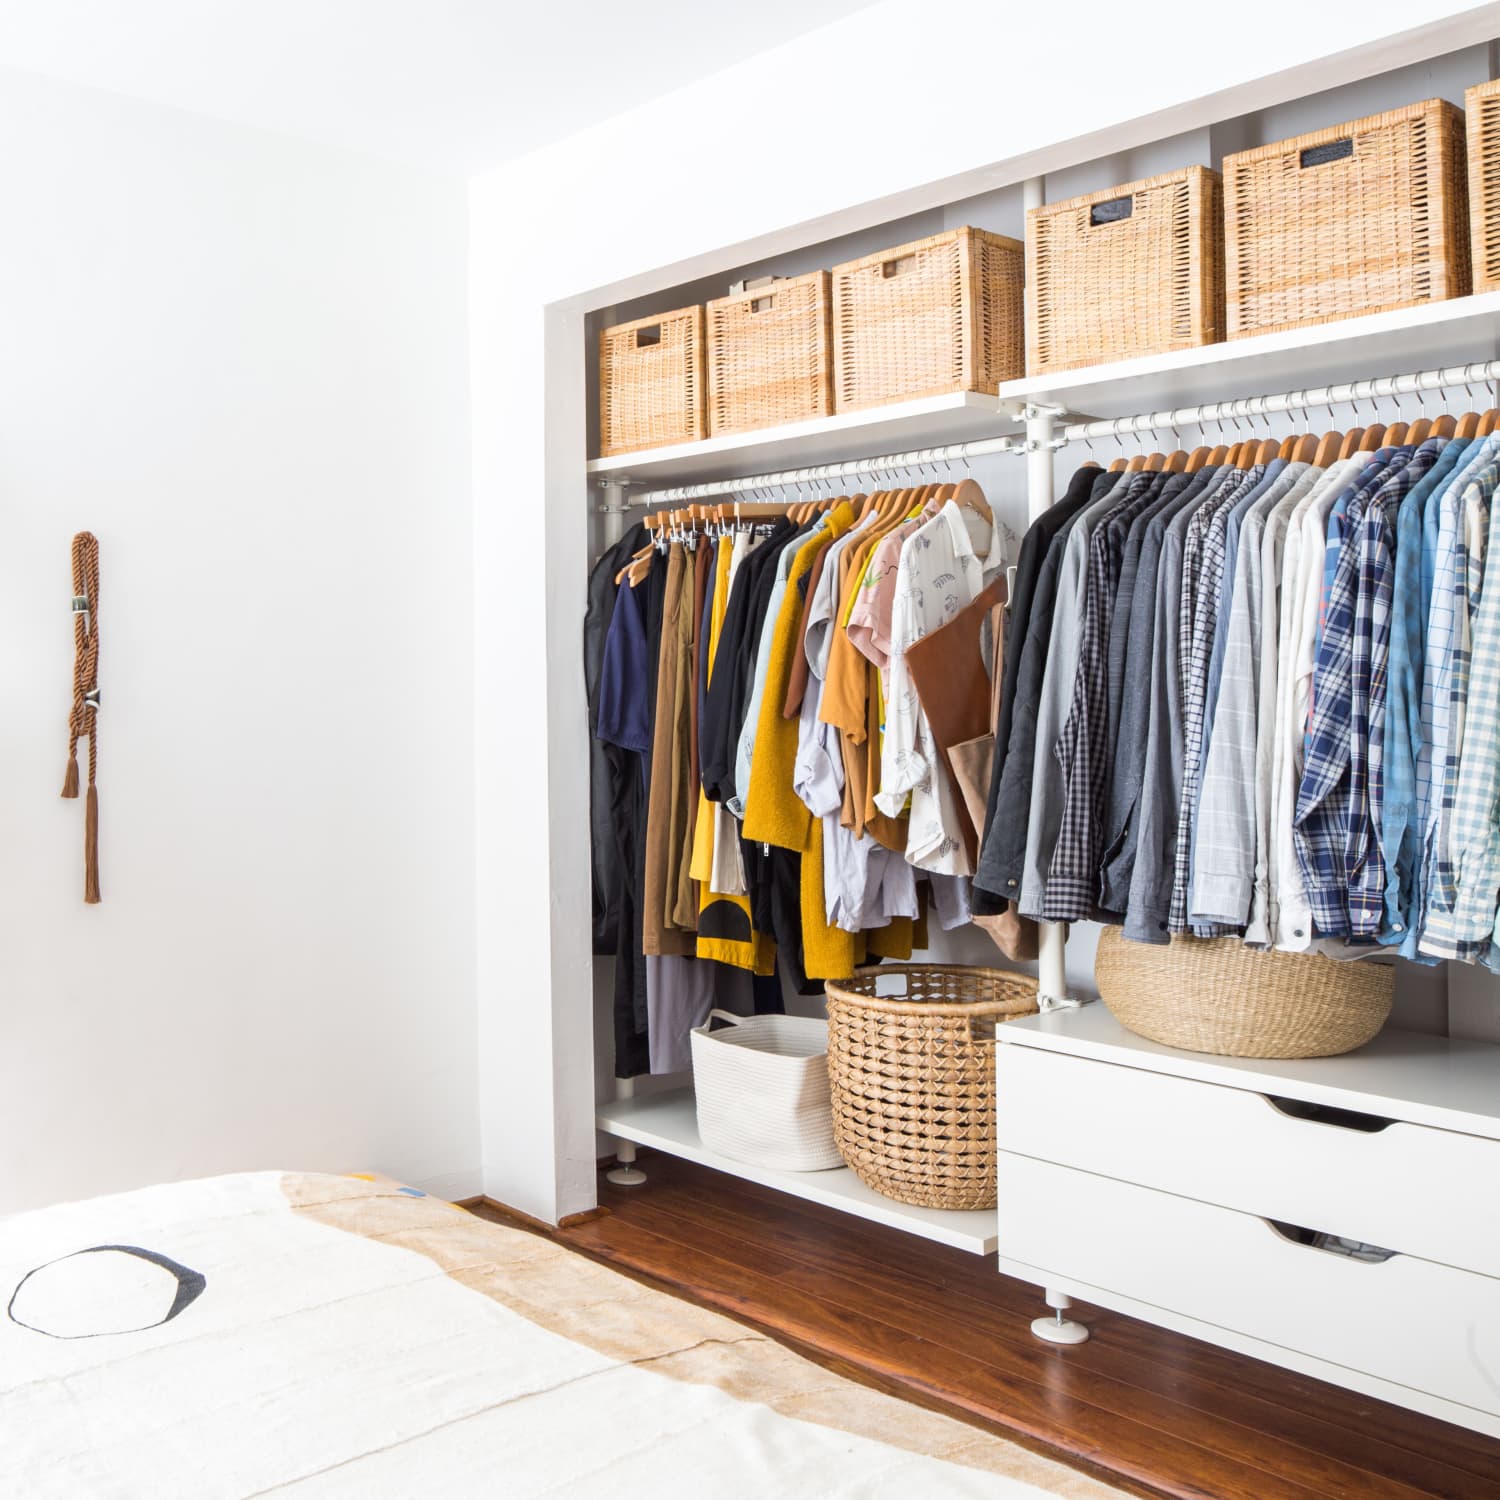 The Best Closet Organizer for Your Needs